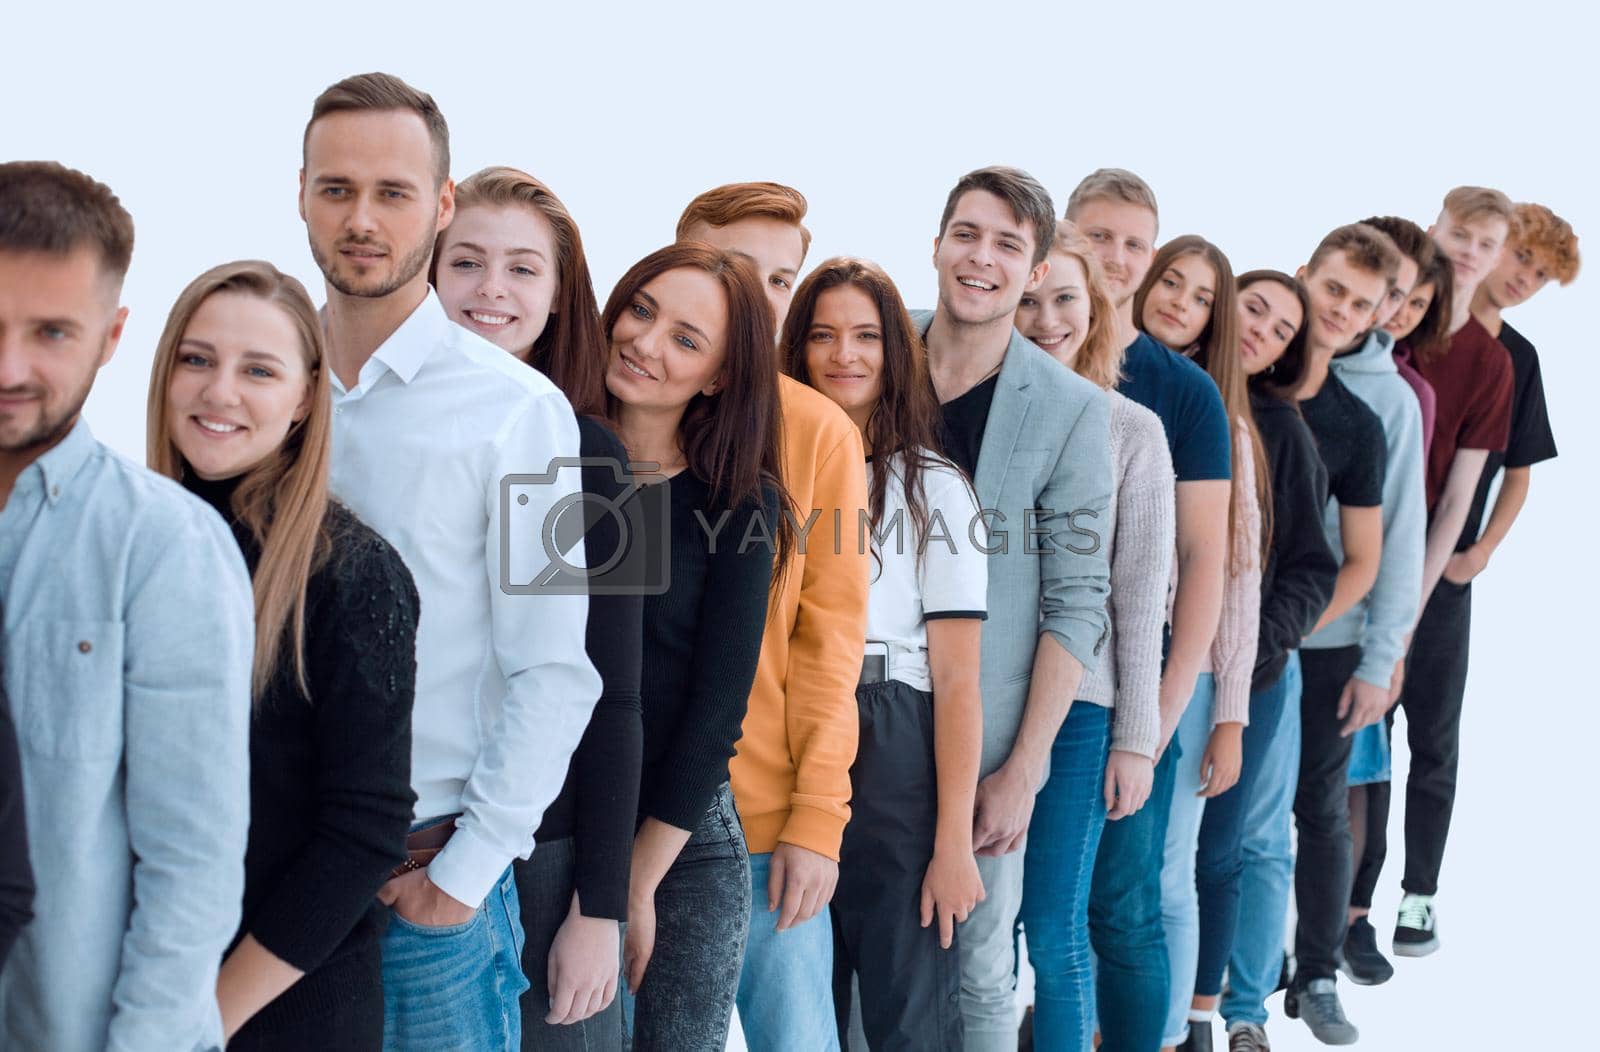 Royalty free image of group of hilarious doctor interns showing thumbs up by asdf